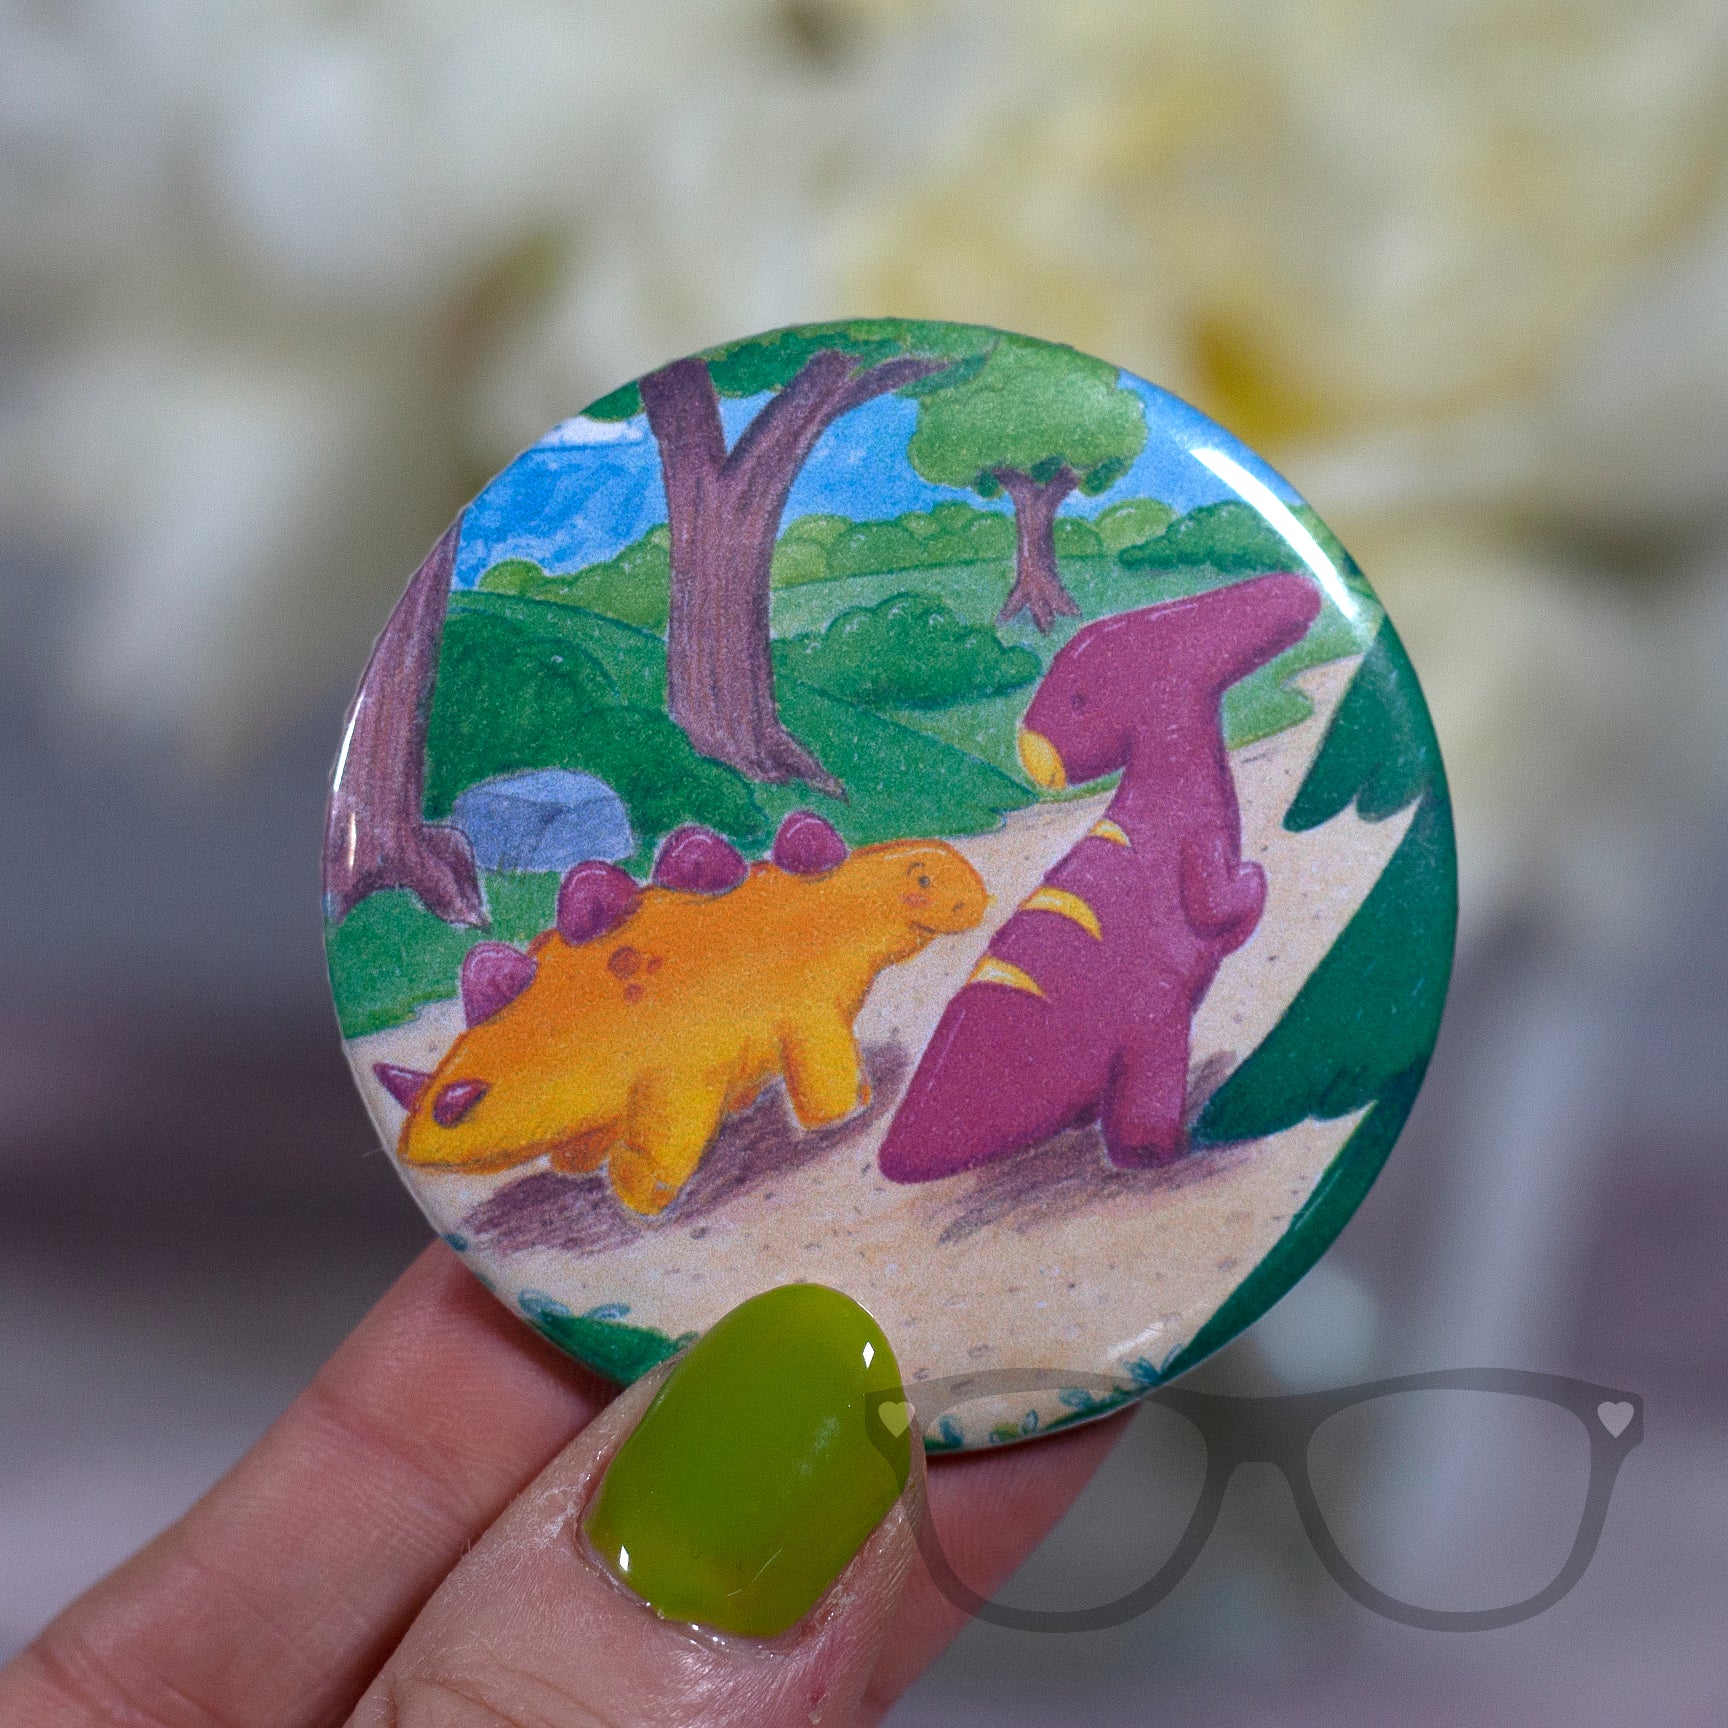 This 58mm badge shows the illustration of Derek and Irene the dinosaurs starting off on their adventure.